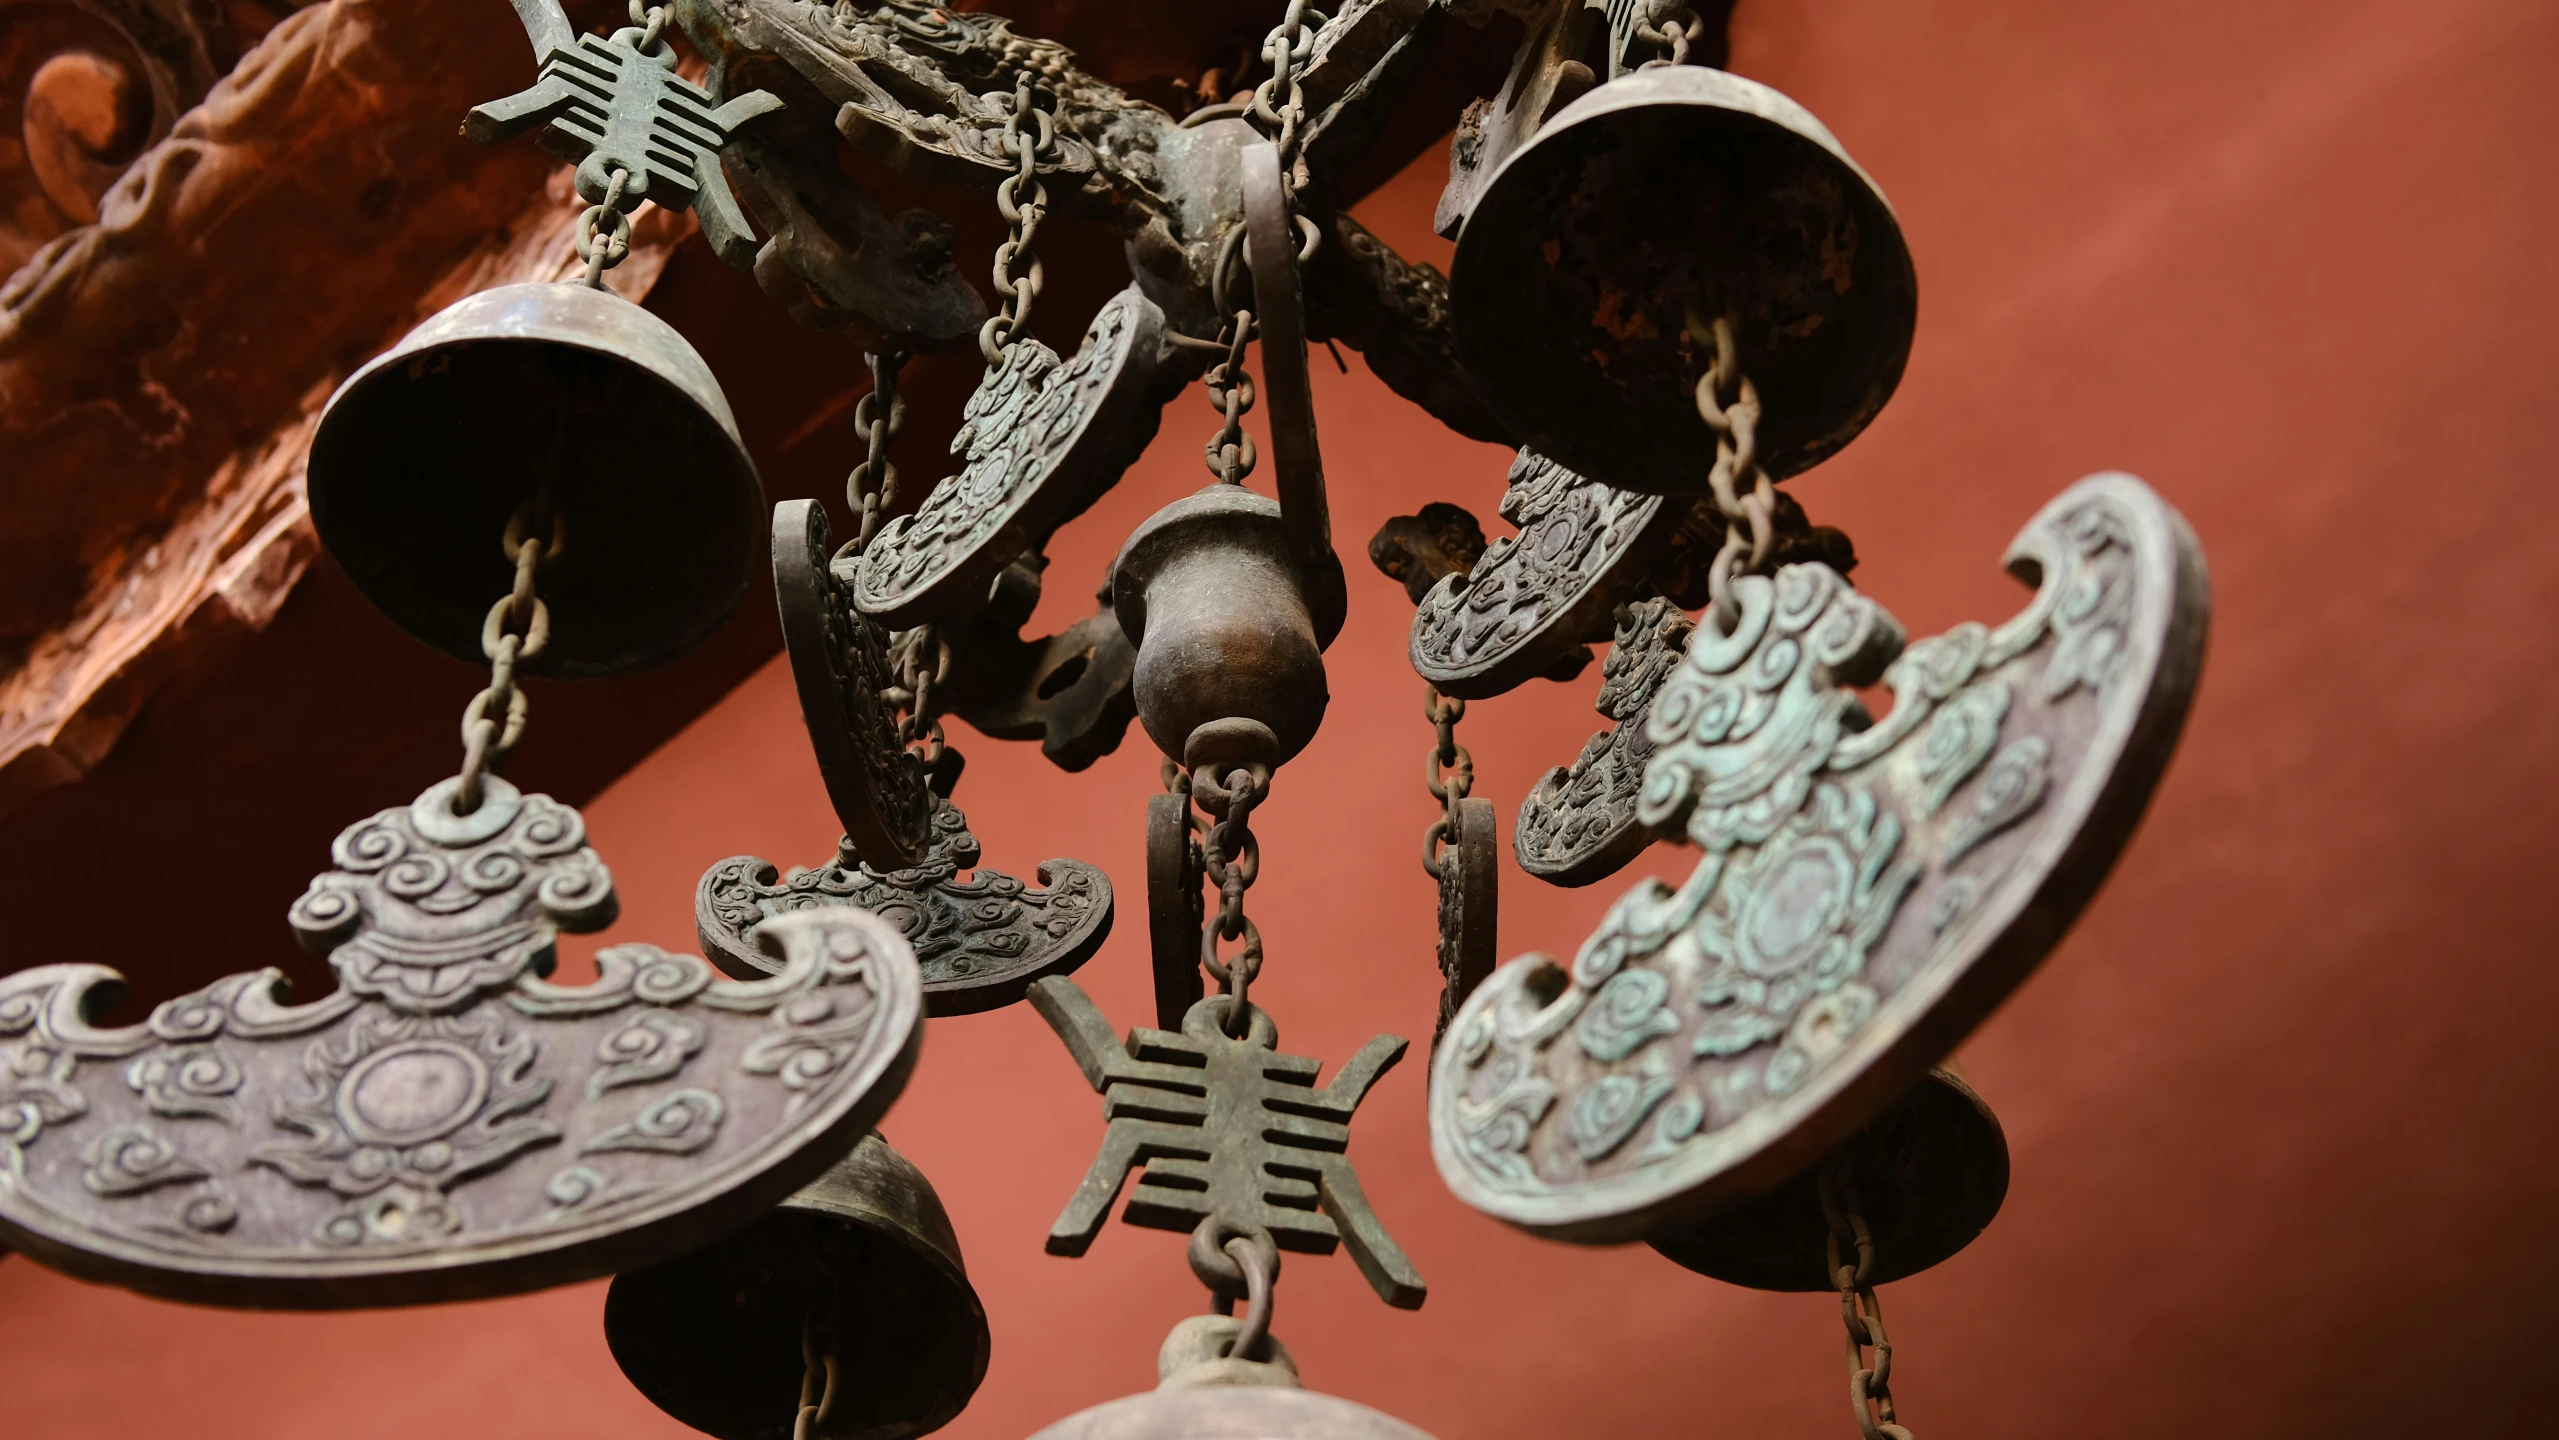 bells hang from chains near a red wall